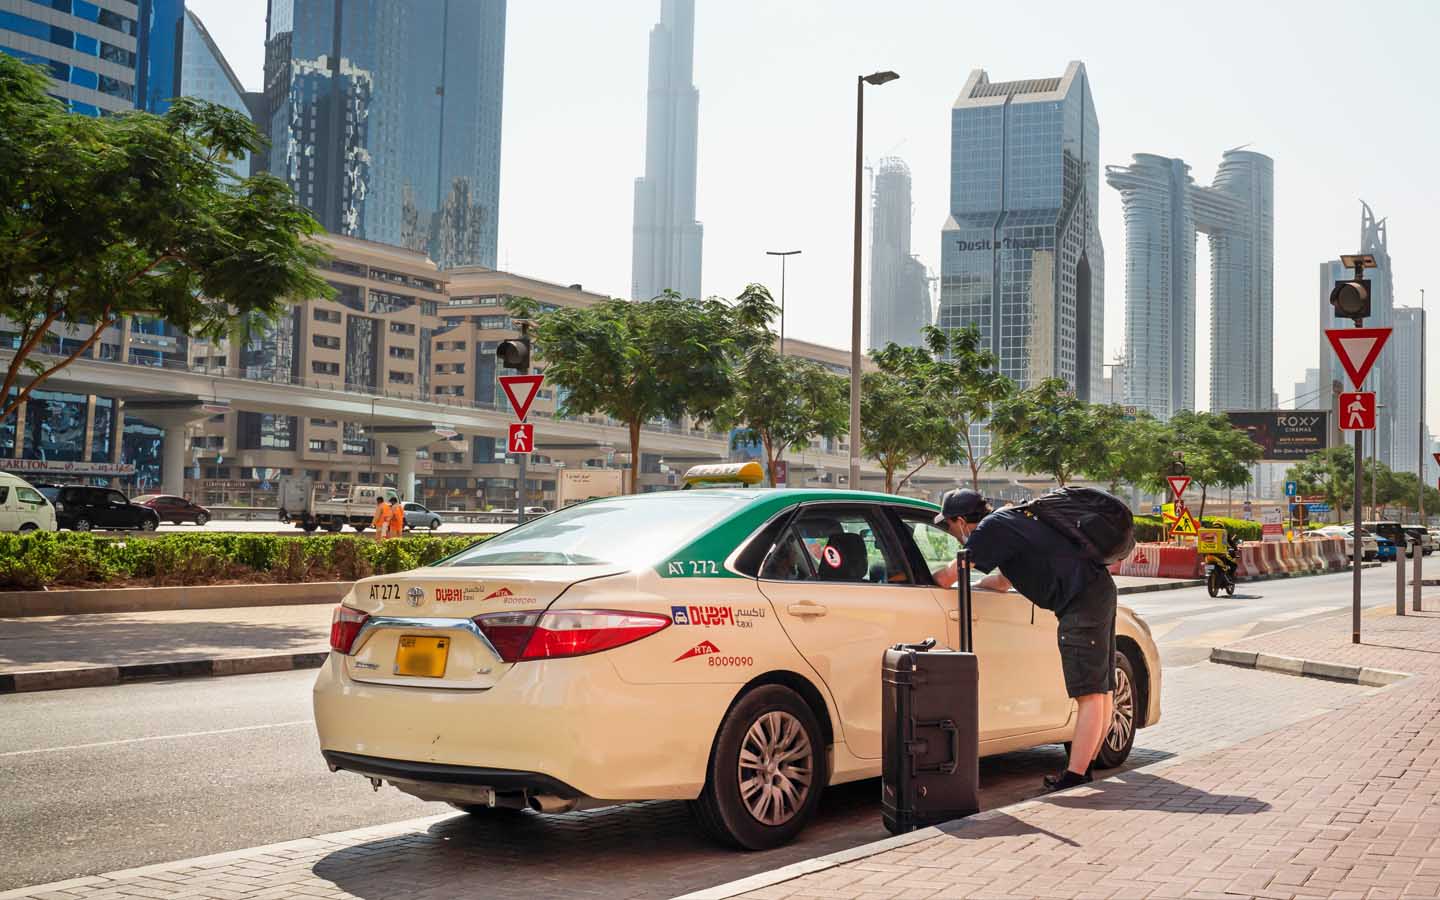 taxi passenger rights and responsibilities dubai include a person with luggage hiring a taxi can ask for loading and unloading of the luggage from the driver